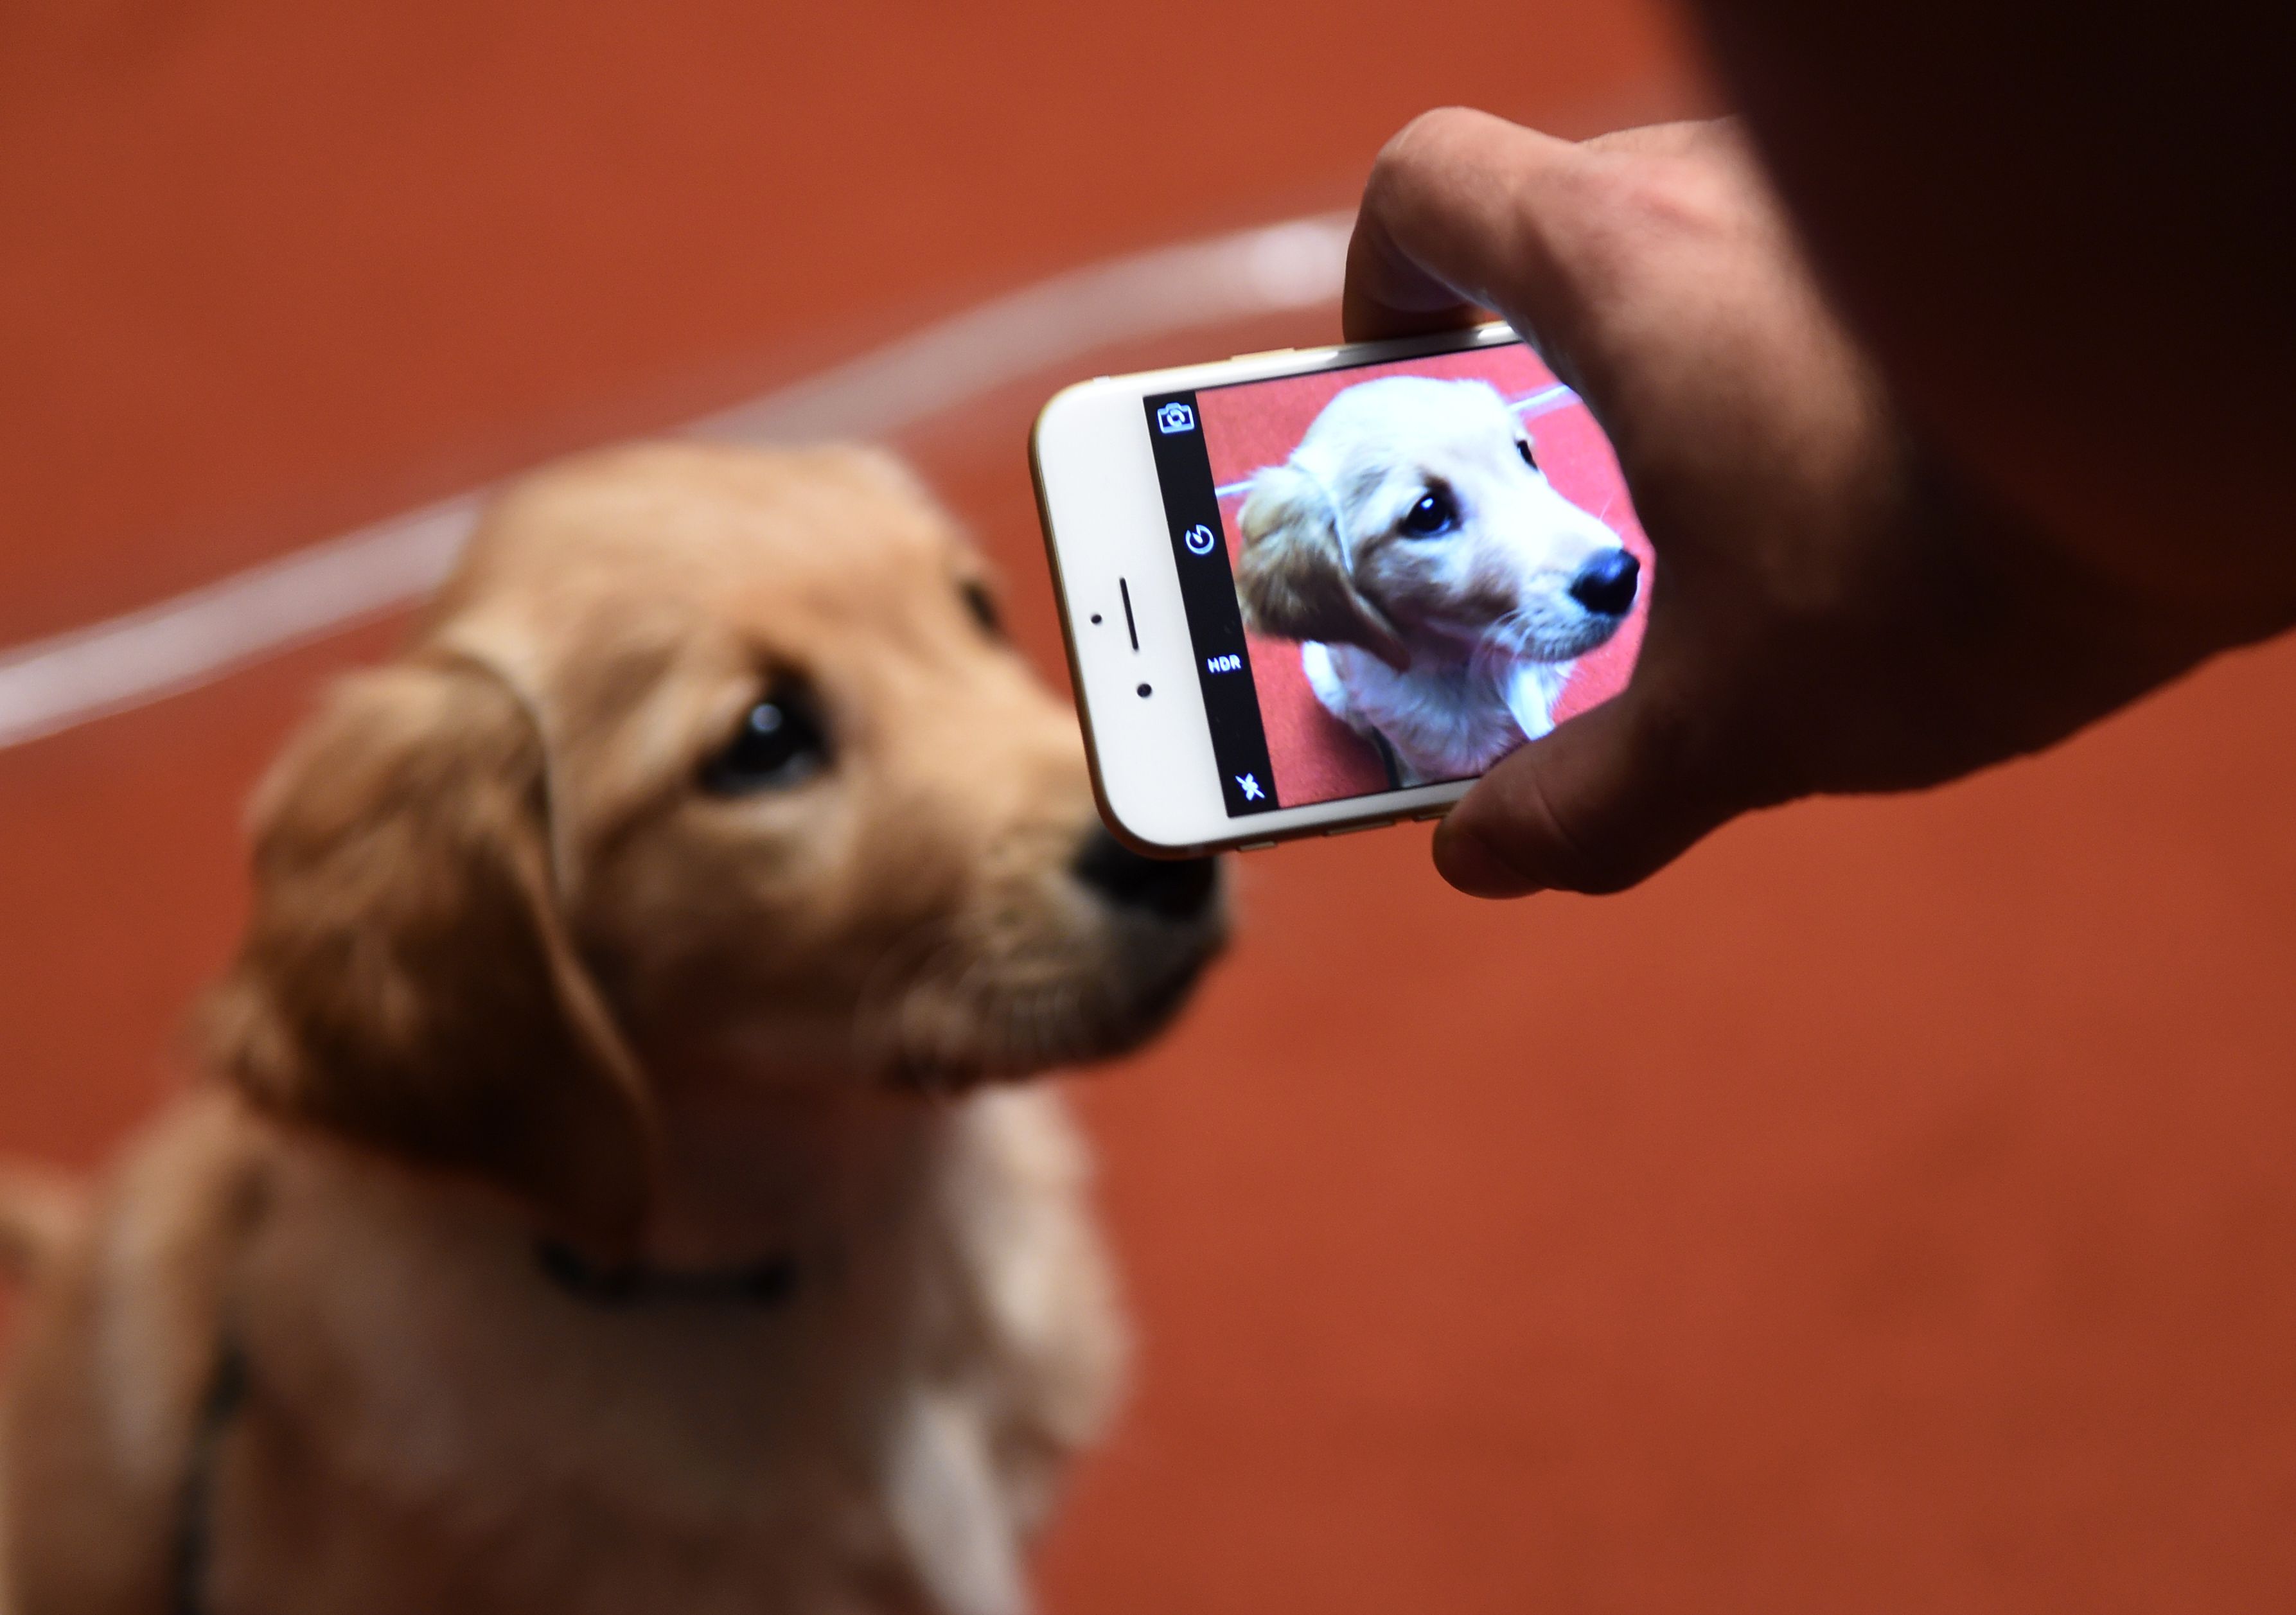 Man photographing a Golden Retriever with a cell phone. | Source: Getty Images